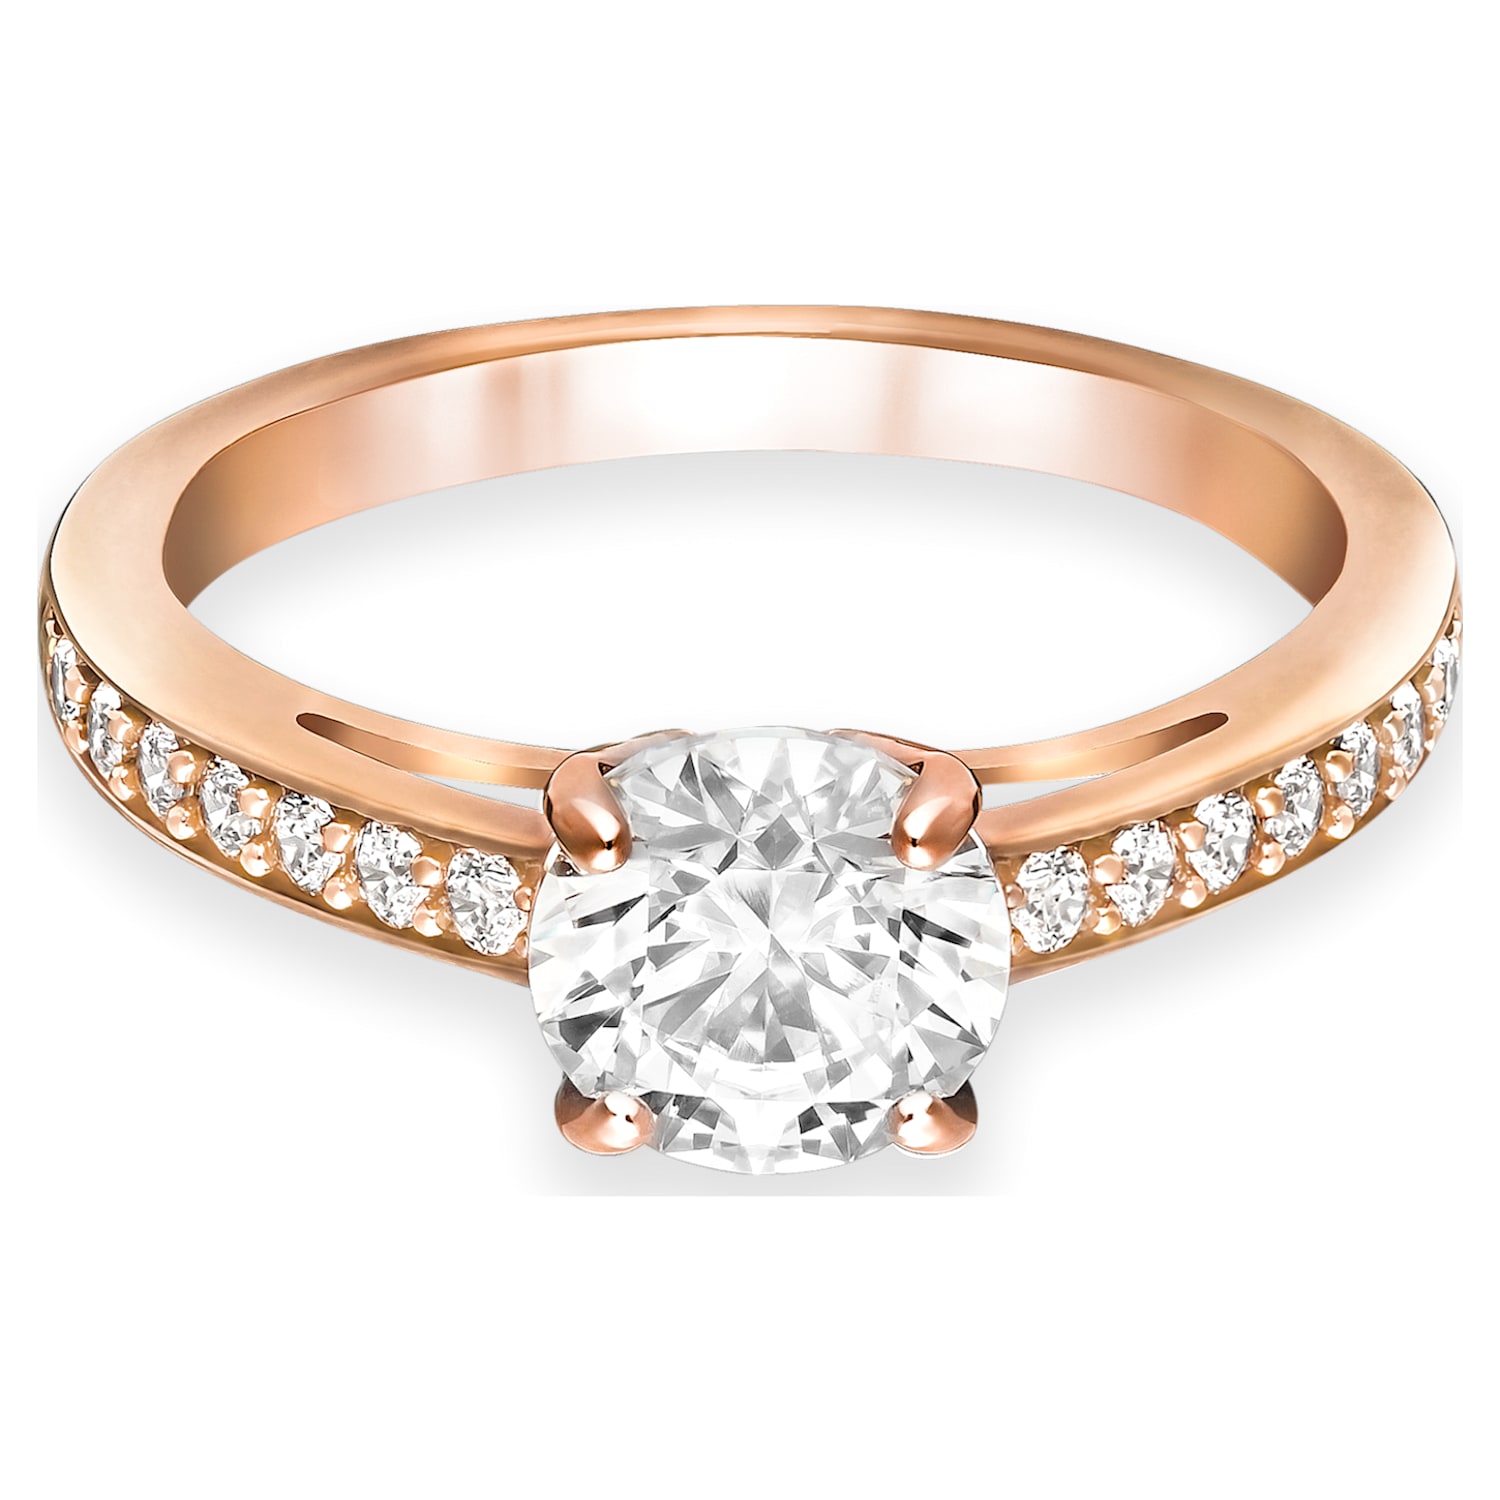 Attract ring, Round, Pavé, White, Rose-gold tone plated